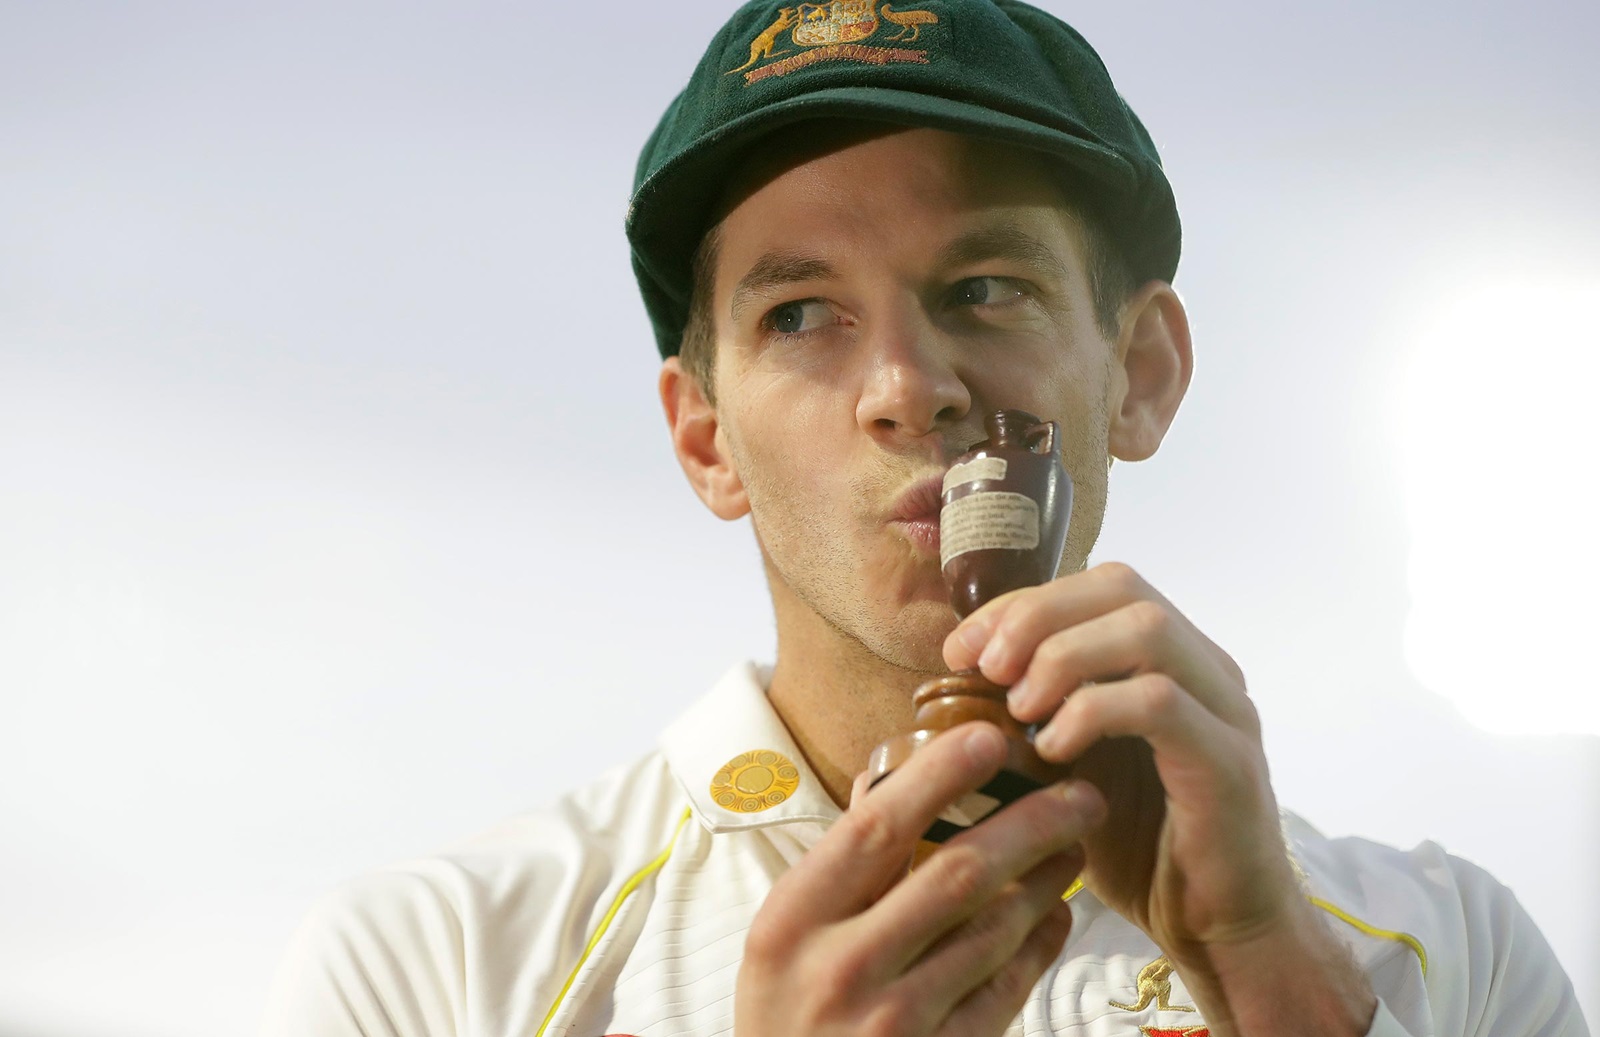 Tim Paine: Cricket delay shall extend playing career